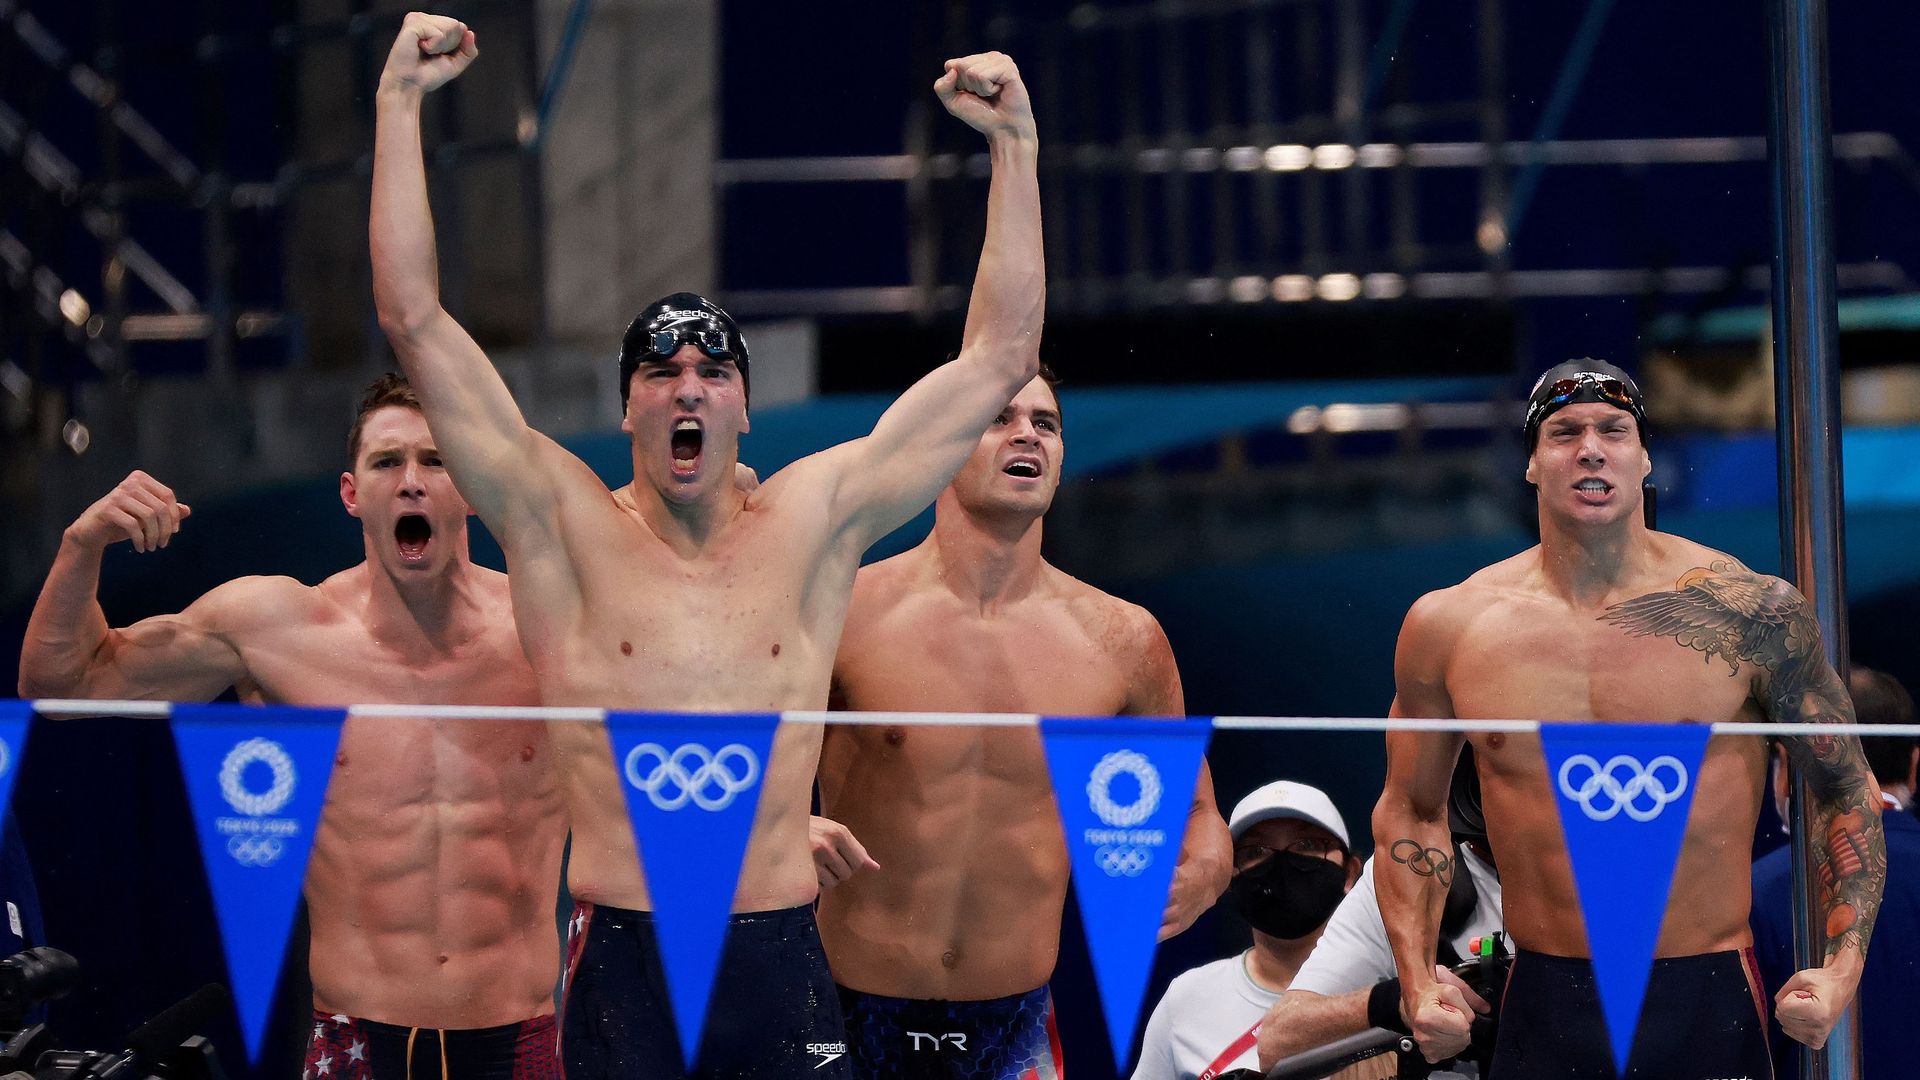 USA's Ryan Murphy,Zach Apple,  Michael Andrew and Caeleb Dressel celebrate winning gold in the final of the men's 4x100m medley relay swimming event during the Tokyo 2020 Olympic Games 